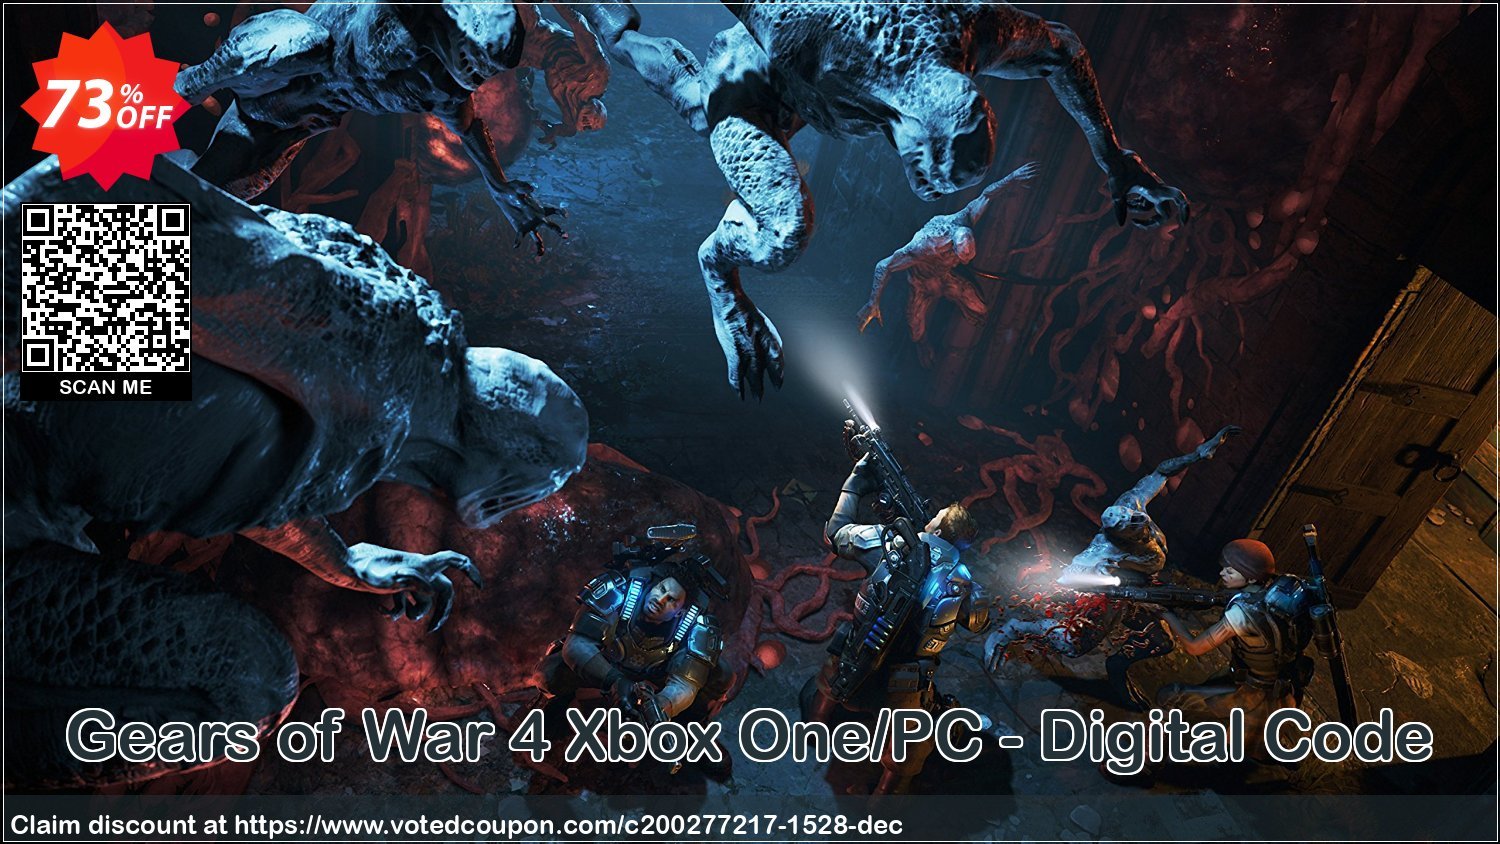 Gears of War 4 Xbox One/PC - Digital Code Coupon, discount Gears of War 4 Xbox One/PC - Digital Code Deal. Promotion: Gears of War 4 Xbox One/PC - Digital Code Exclusive offer 